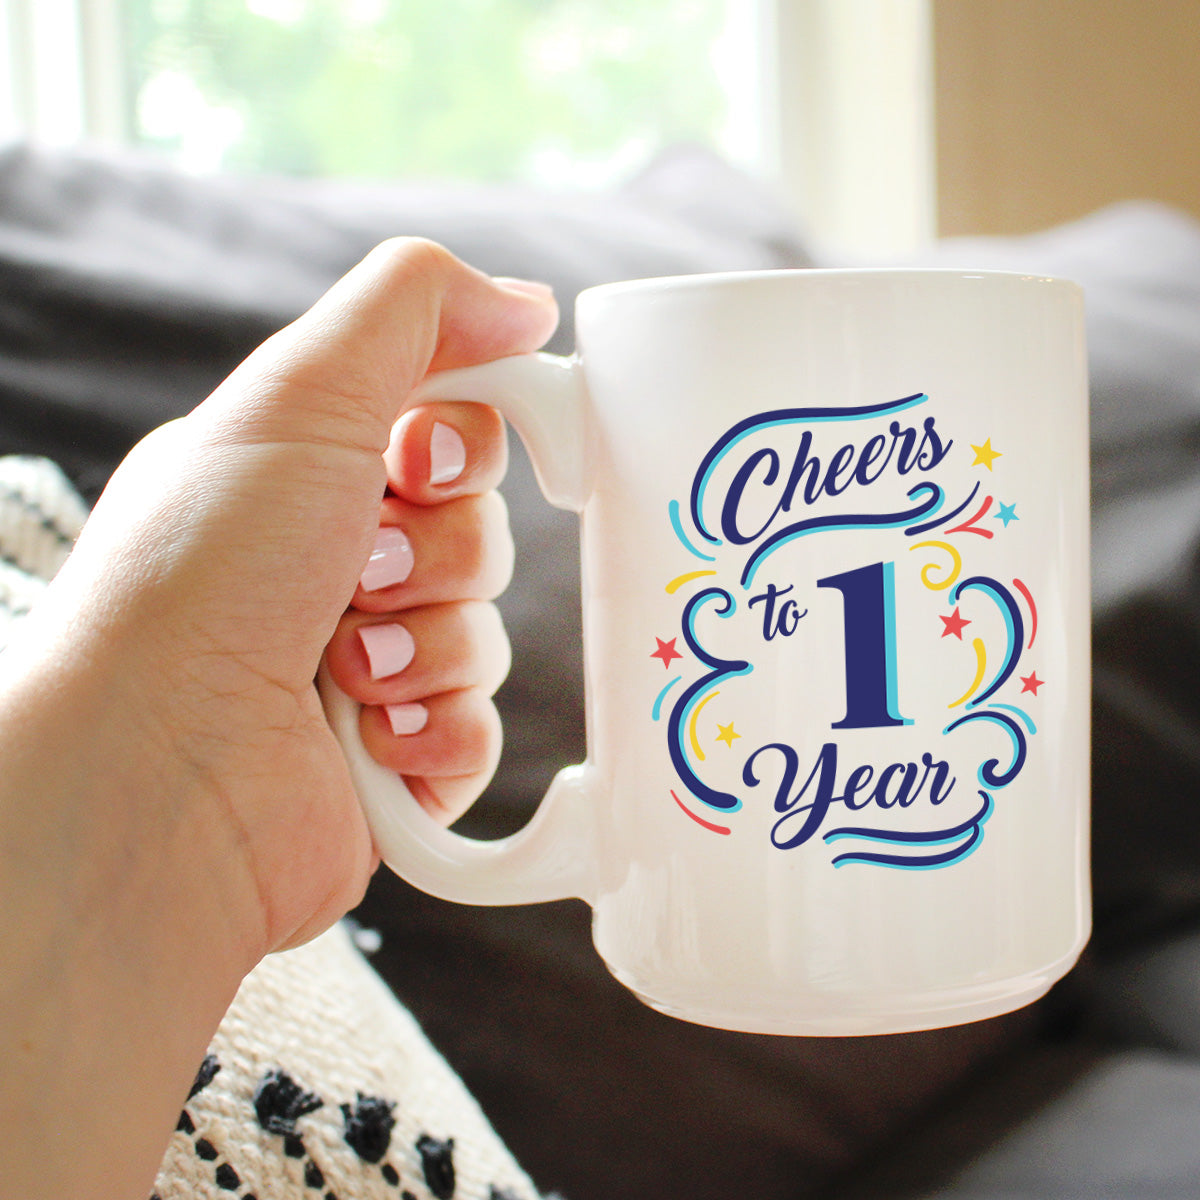 Cheers to 1 Year - Coffee Mug Gifts for Women &amp; Men - 1st Anniversary Party Decor